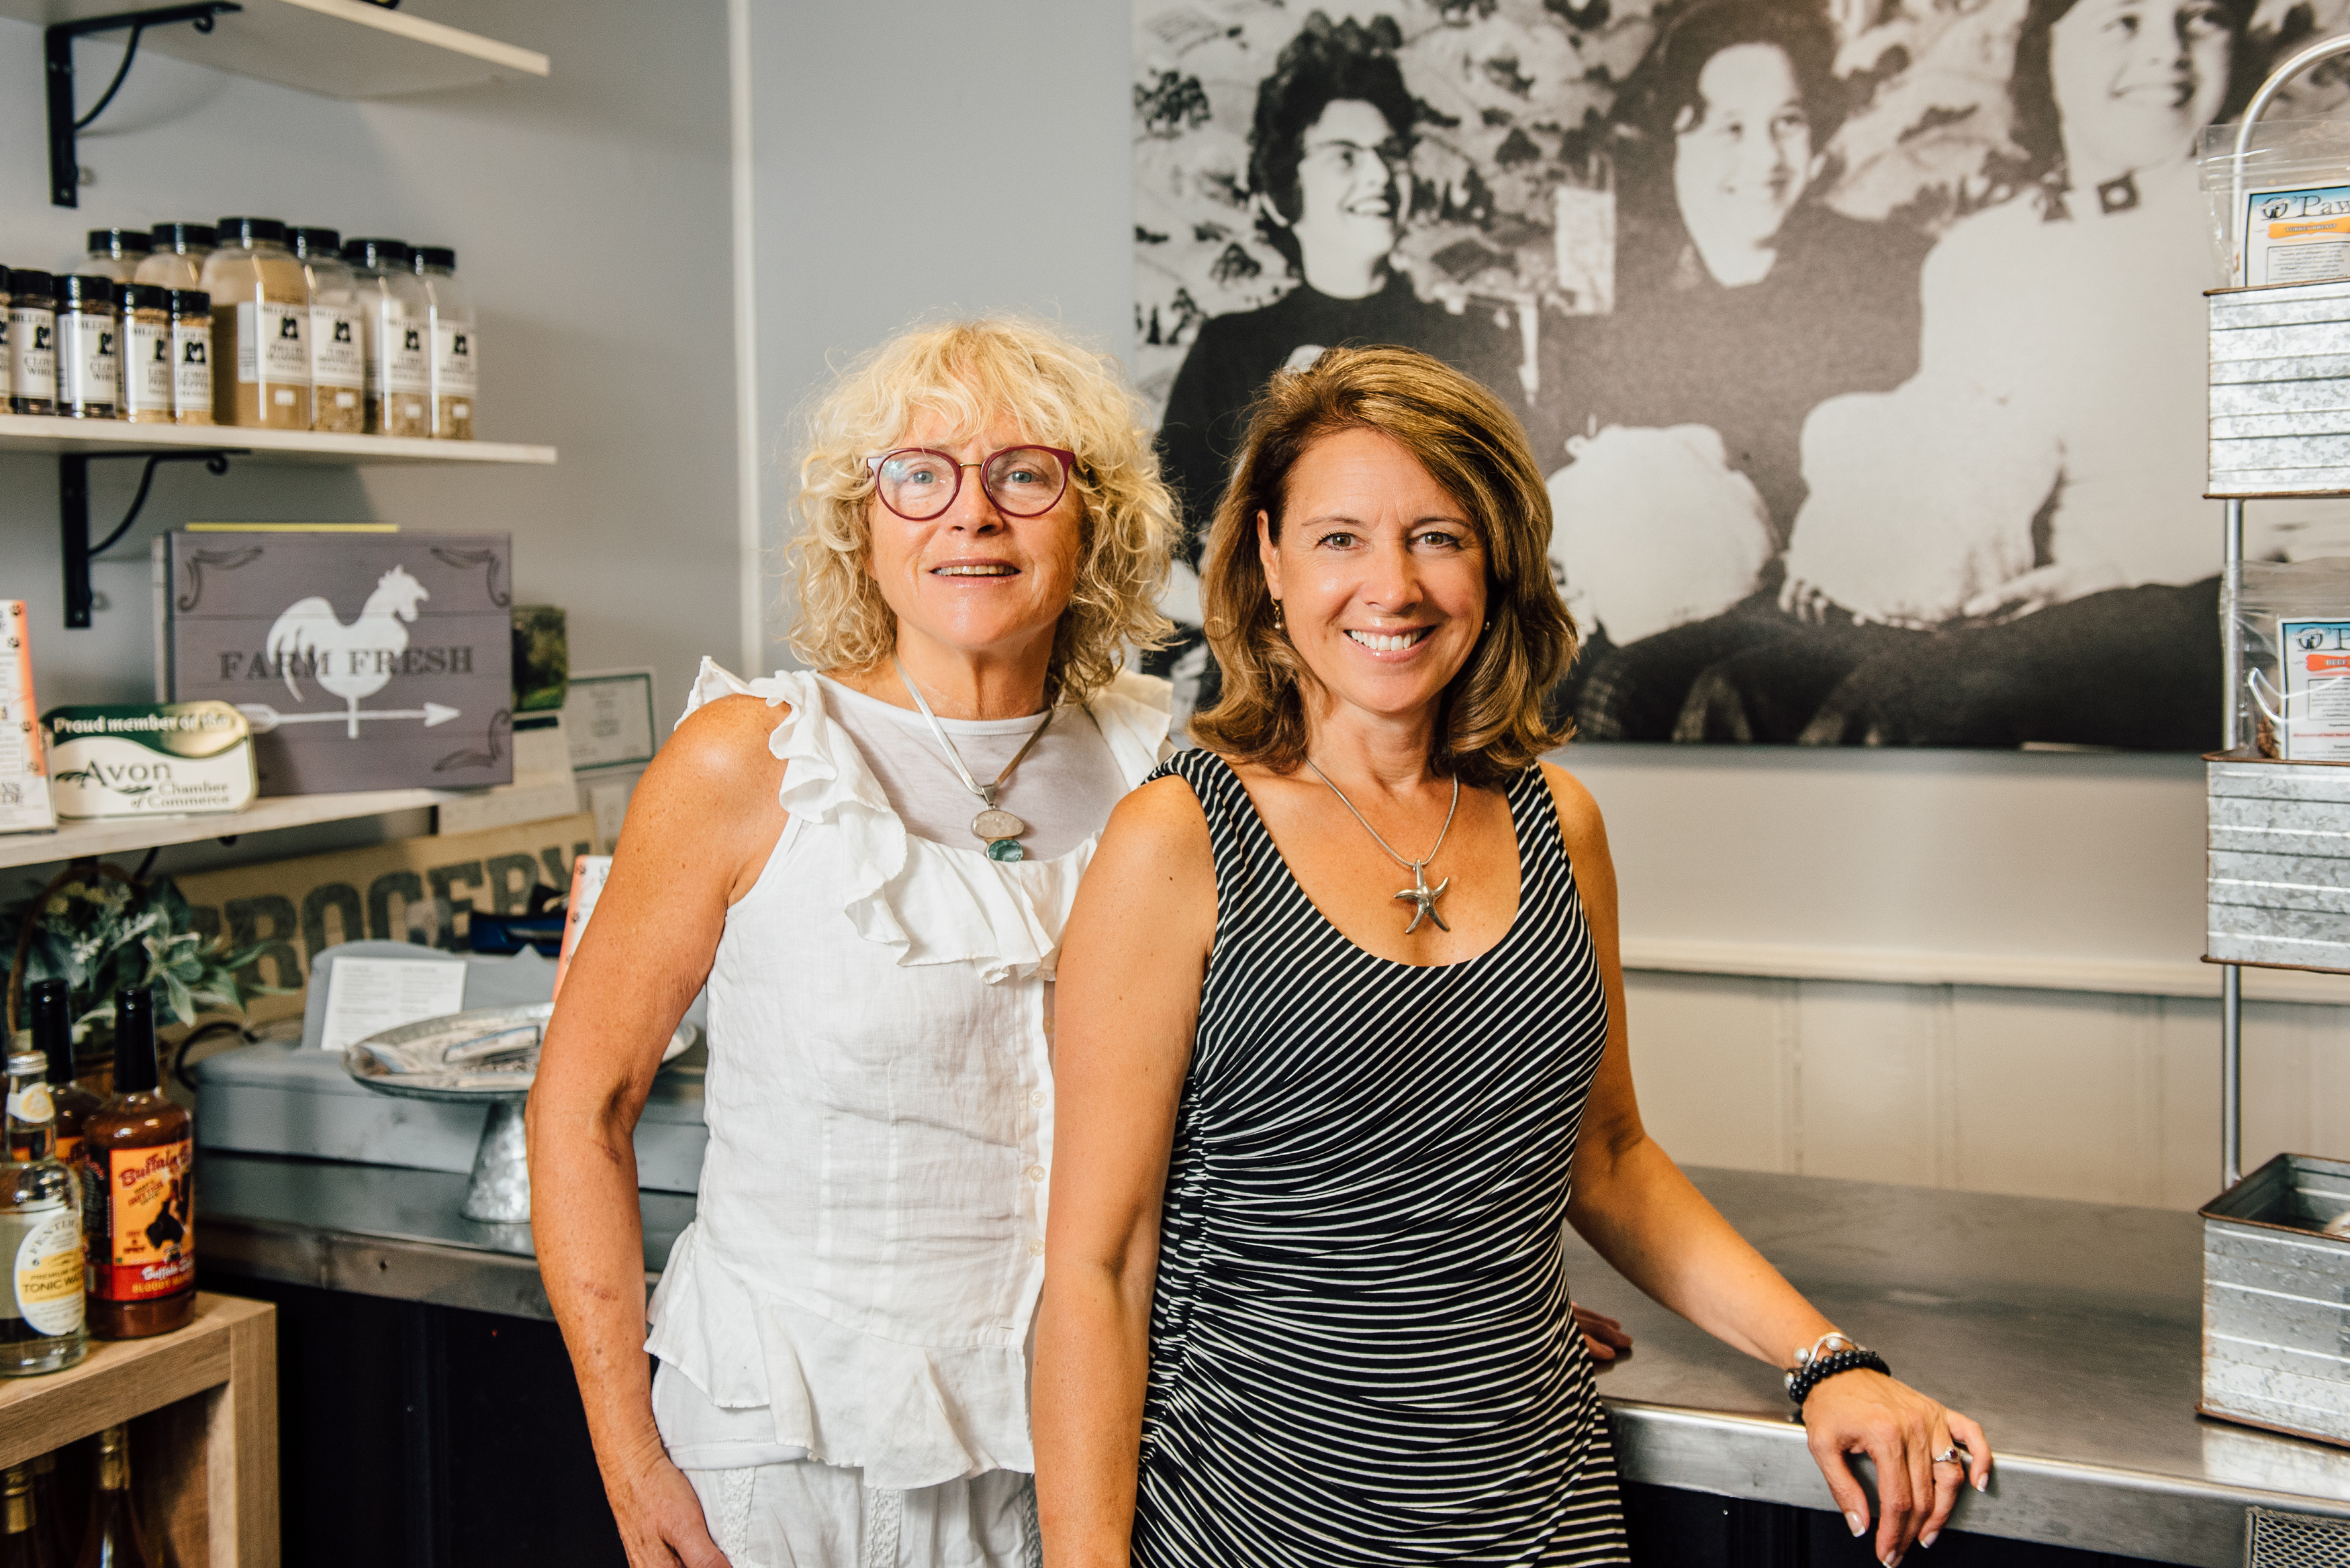 Cal Miller-Stevens, left, and her niece Capri Frank pose for a photo inside the store at Miller Foods Inc., a fourth-generation, family-owned and operated food business located in Avon, Connecticut. Behind them is a photo taken in the early 1960s, in the same location. From left is family matriarch Margaret 'Oma' Miller and her two daughters, Sandi Trudeau (Frank’s mother) and Miller-Stevens. (Nathan Oldham/UConn Photo)